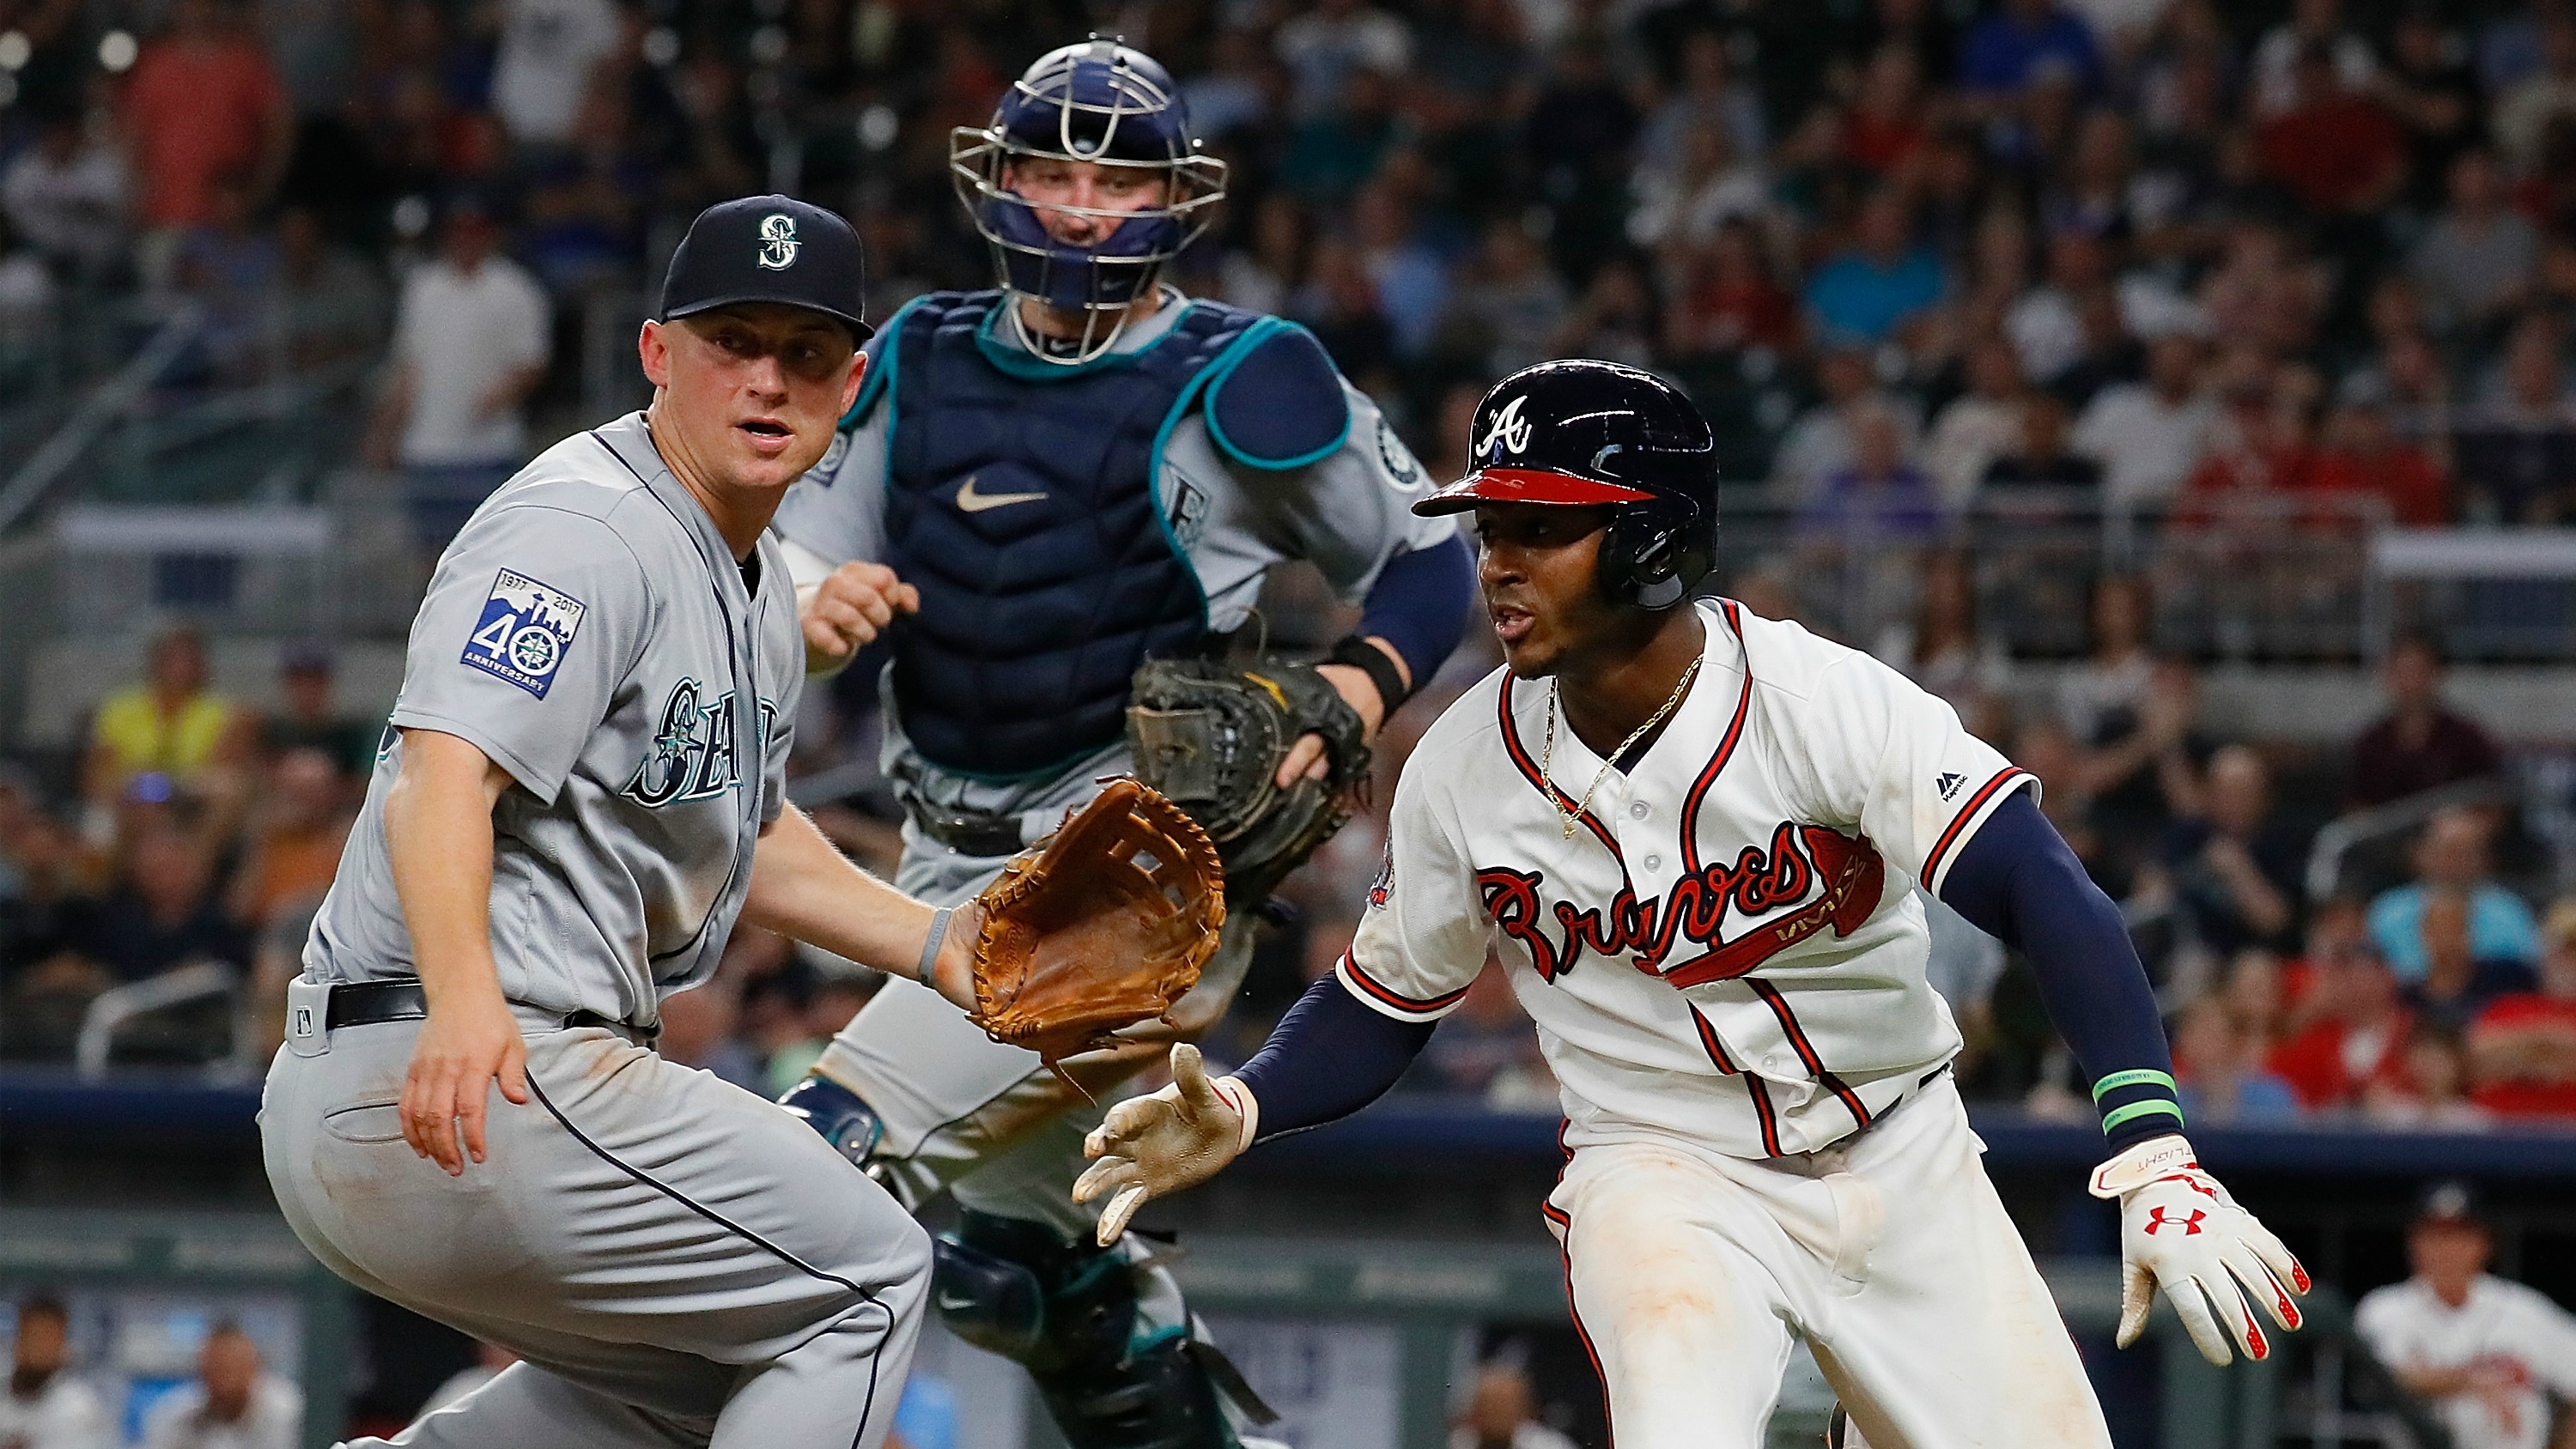 Braves score on crazy play, beat Mariners 4-0